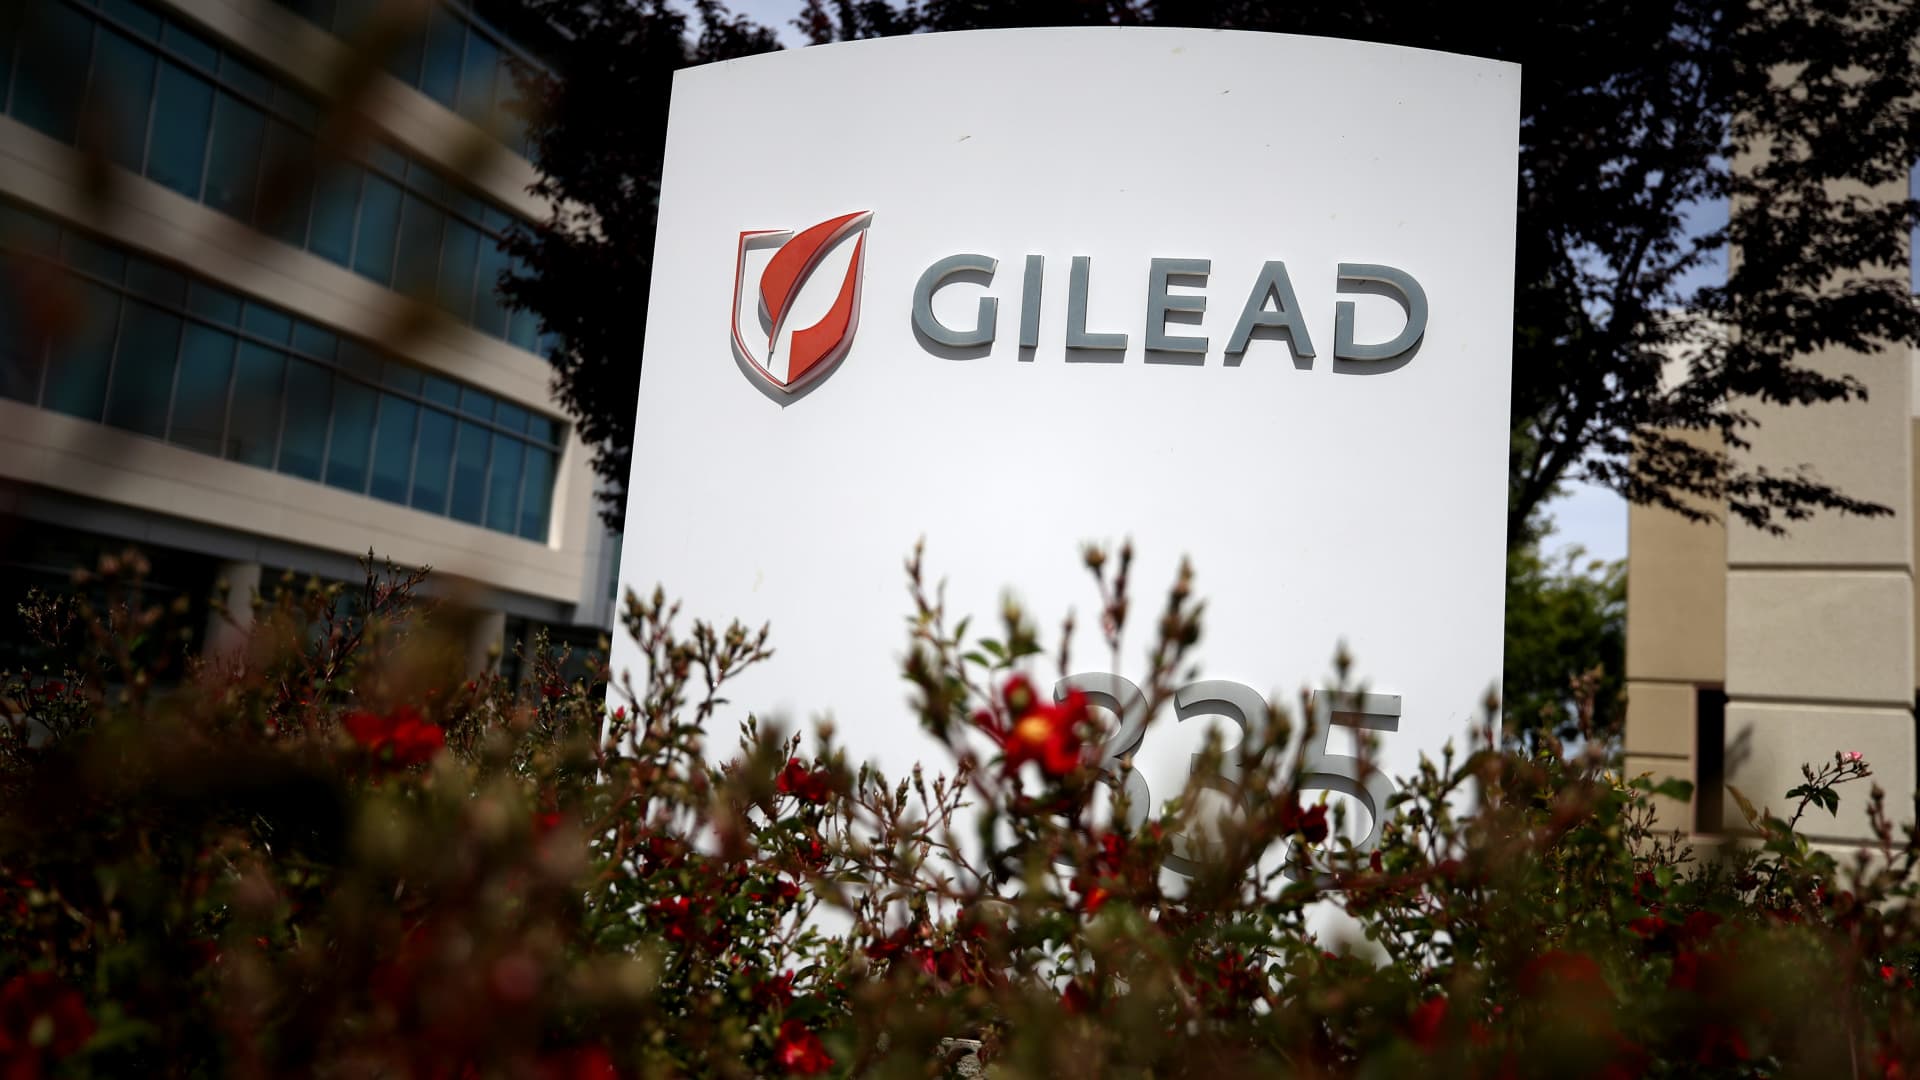 AutoZone and Gilead are among stocks that historically outperform during bear markets